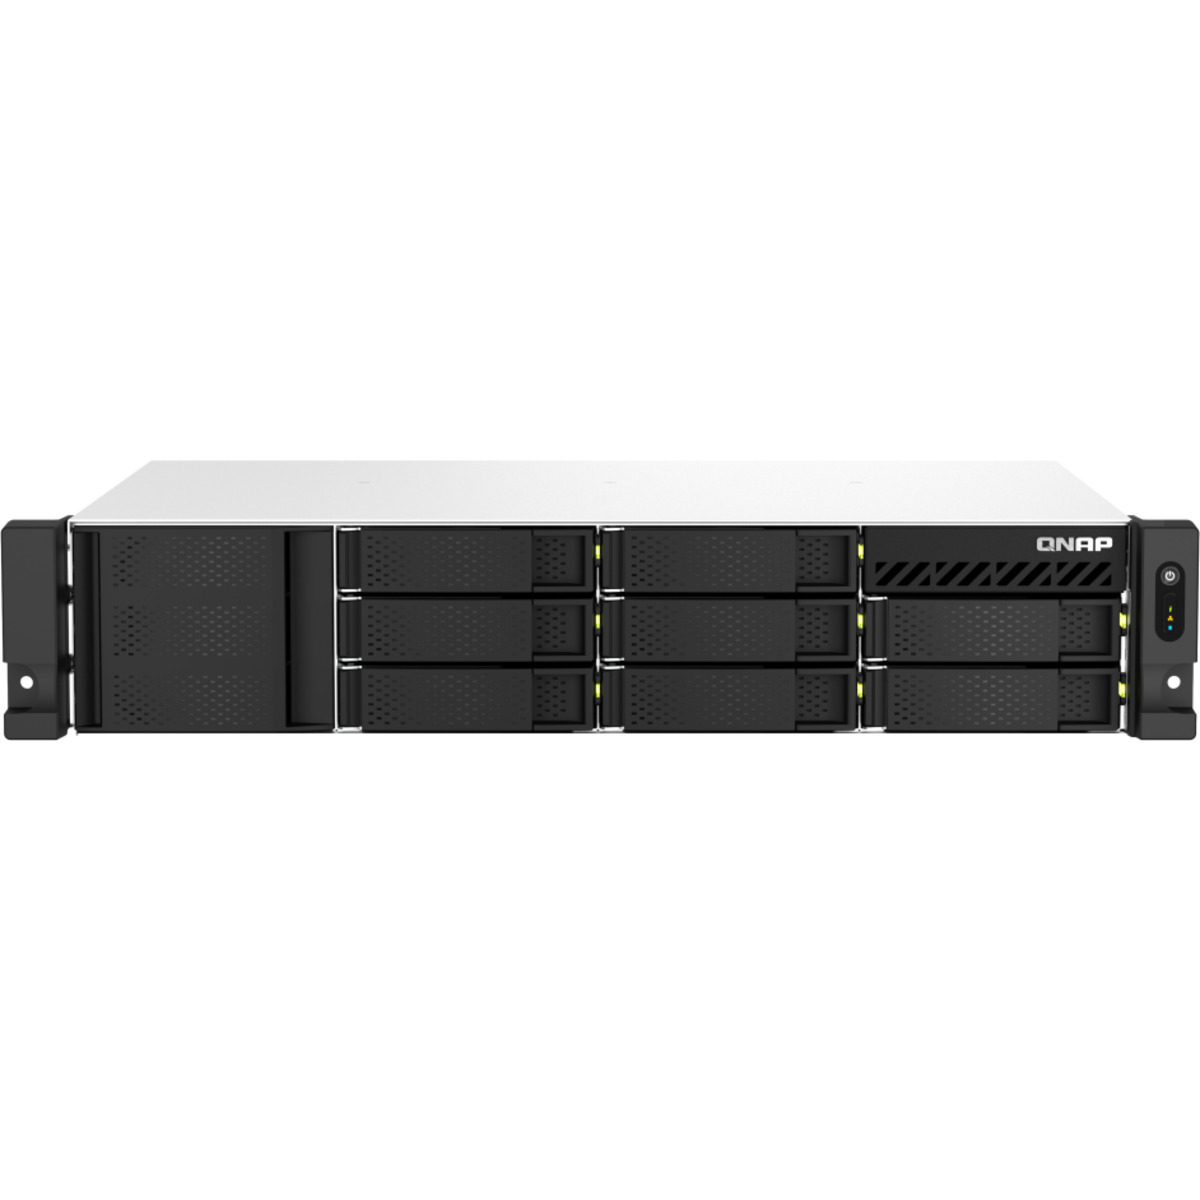 buy QNAP TS-873AeU-RP 16tb RackMount NAS - Network Attached Storage Device 8x2000gb Seagate IronWolf Pro ST2000NT001 3.5 7200rpm SATA 6Gb/s HDD NAS Class Drives Installed - Burn-In Tested - FREE RAM UPGRADE - nas headquarters buy network attached storage server device das new raid-5 free shipping simply usa TS-873AeU-RP